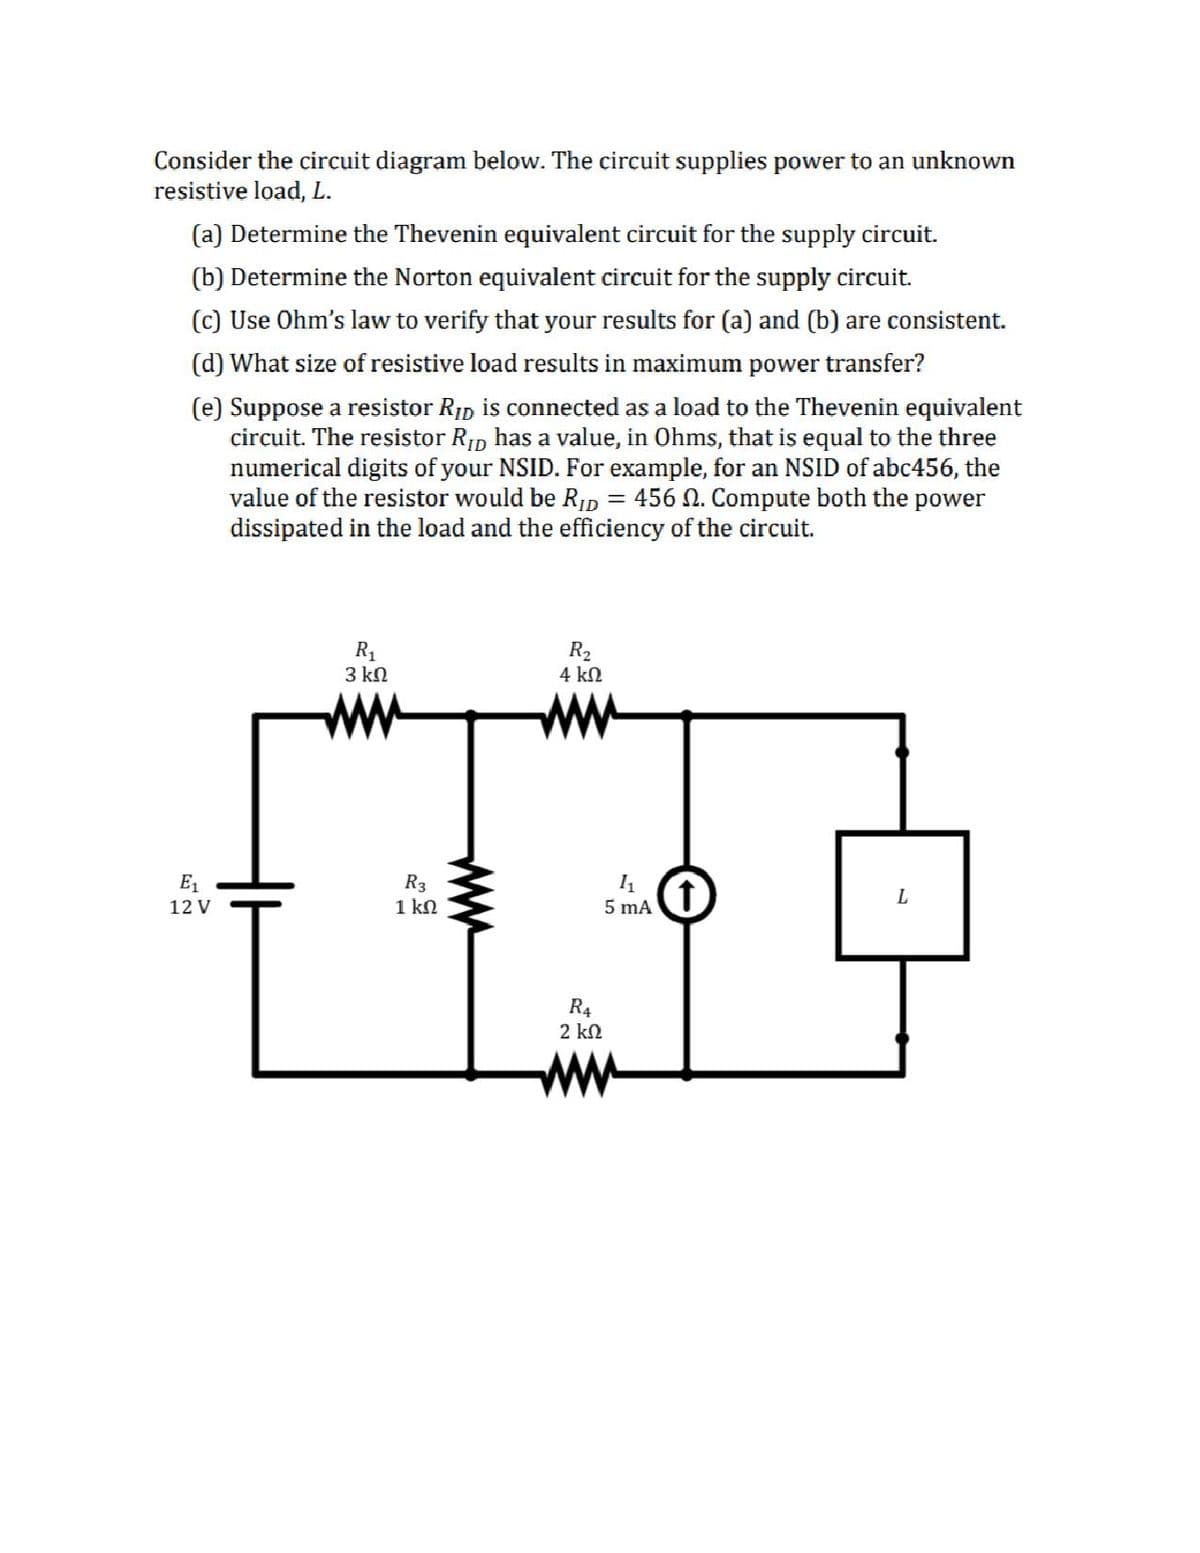 Consider the circuit diagram below. The circuit supplies power to an unknown
resistive load, L.
(a) Determine the Thevenin equivalent circuit for the supply circuit.
(b) Determine the Norton equivalent circuit for the supply circuit.
(c) Use Ohm's law to verify that your results for (a) and (b) are consistent.
(d) What size of resistive load results in maximum power transfer?
(e) Suppose a resistor RIp is connected as a load to the Thevenin equivalent
circuit. The resistor RIp has a value, in Ohms, that is equal to the three
numerical digits of your NSID. For example, for an NSID of abc456, the
value of the resistor would be RID = 456 N. Compute both the power
dissipated in the load and the efficiency of the circuit.
R1
3 kn
R2
4 kN
ww
ww
E1
R3
1 kN
12 V
5 mA
R4
2 kn
ww
ww
